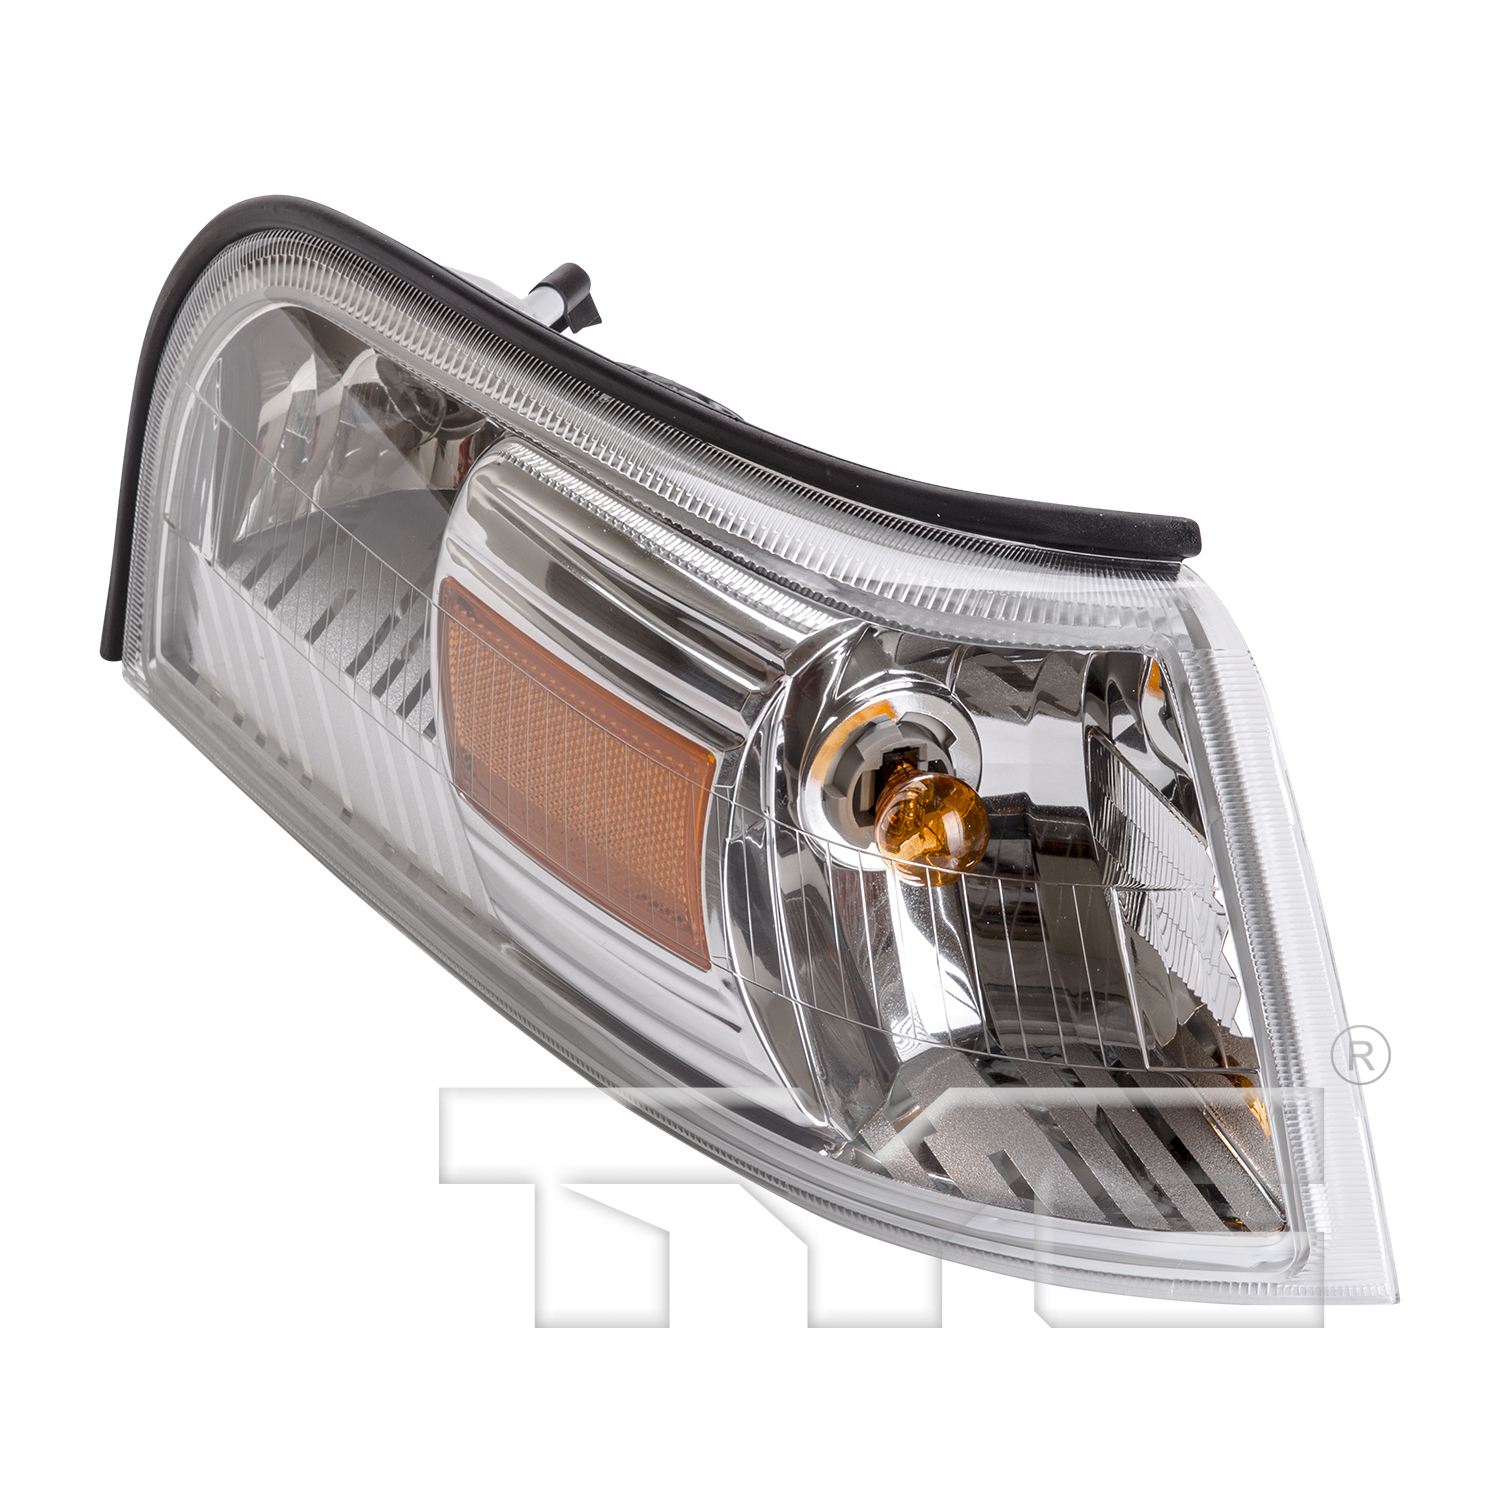 Aftermarket LAMPS for MERCURY - GRAND MARQUIS, GRAND MARQUIS,06-10,RT Parklamp lens/housing